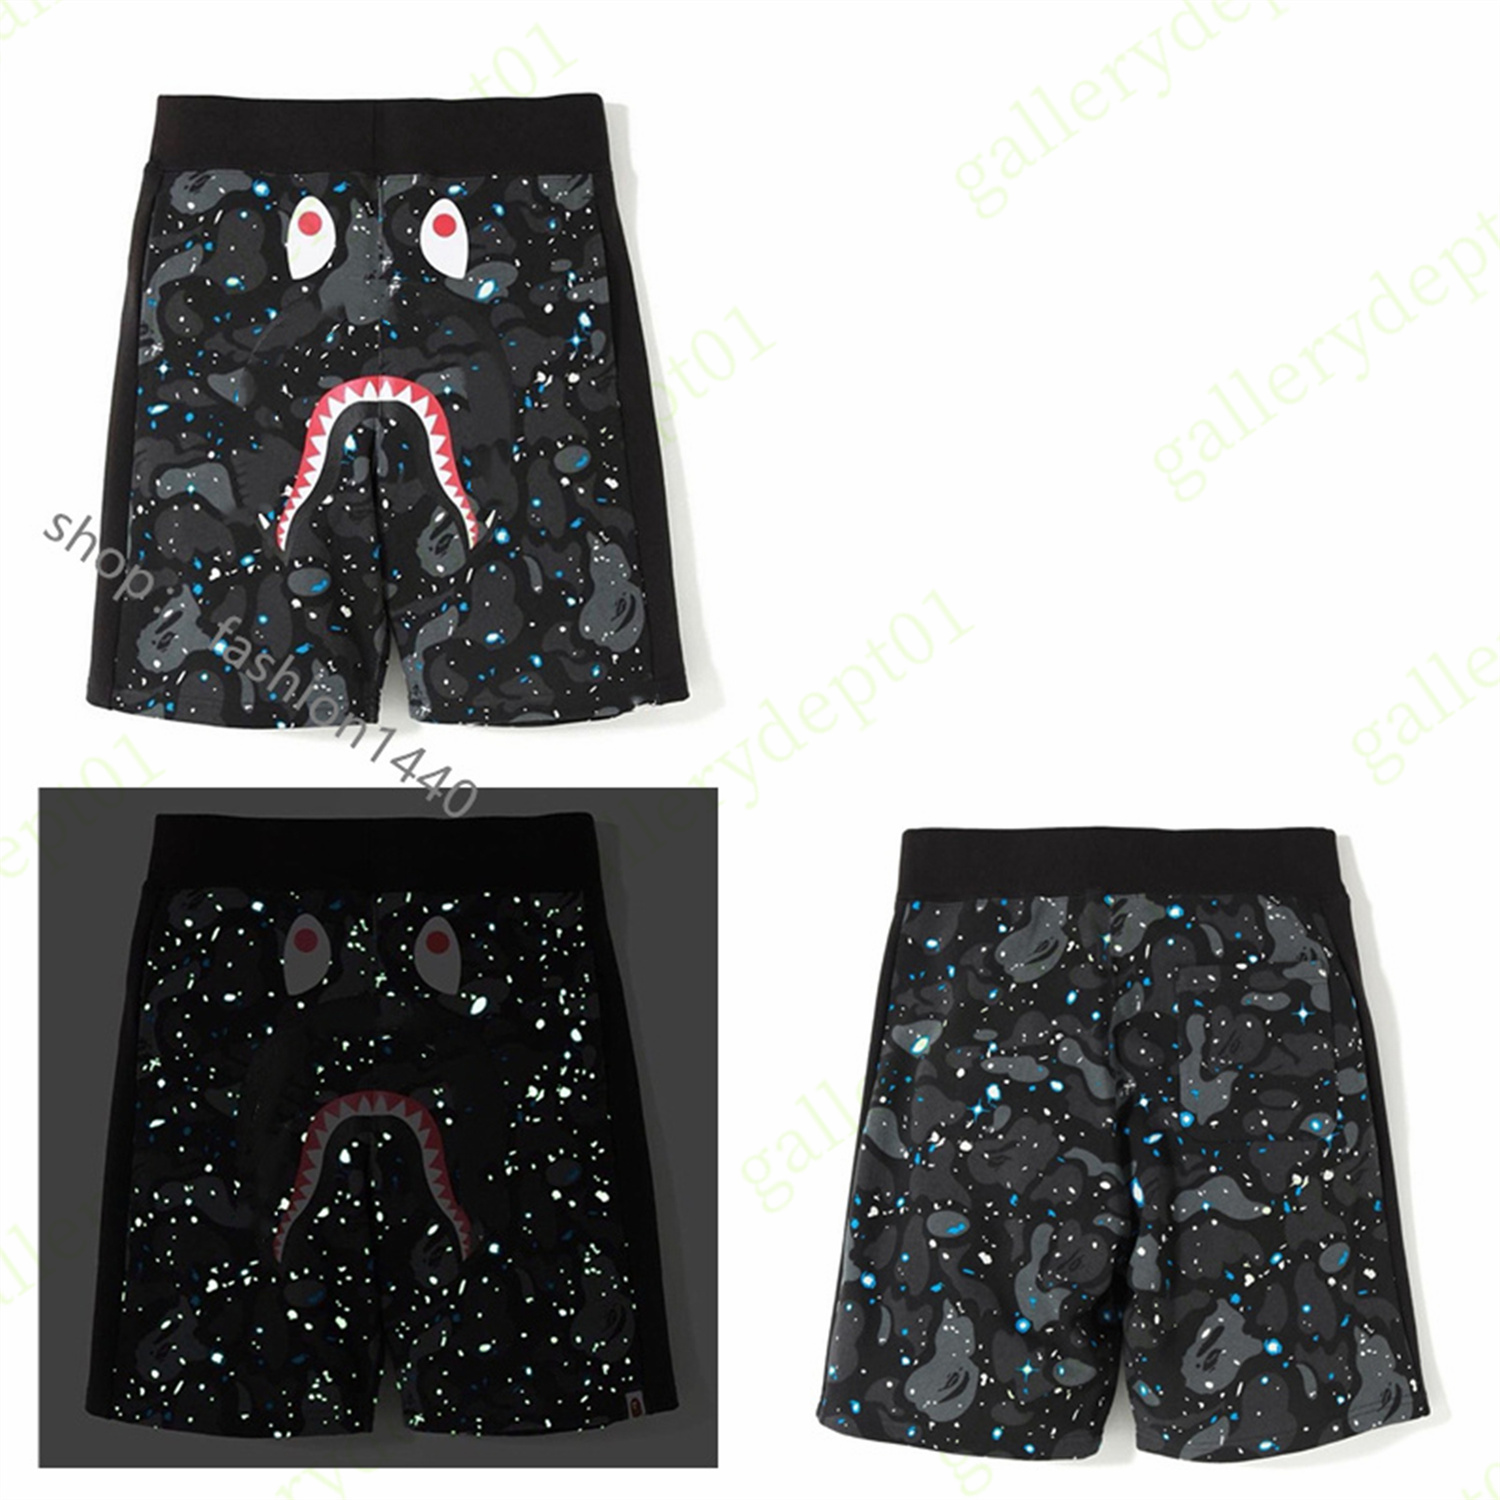 

shark mens shorts designer shorts women swim shorts Embroidered cotton terry Luminous spot camouflage Red blue and purple color Reflective gym swimming inaka B01, 1pcs button